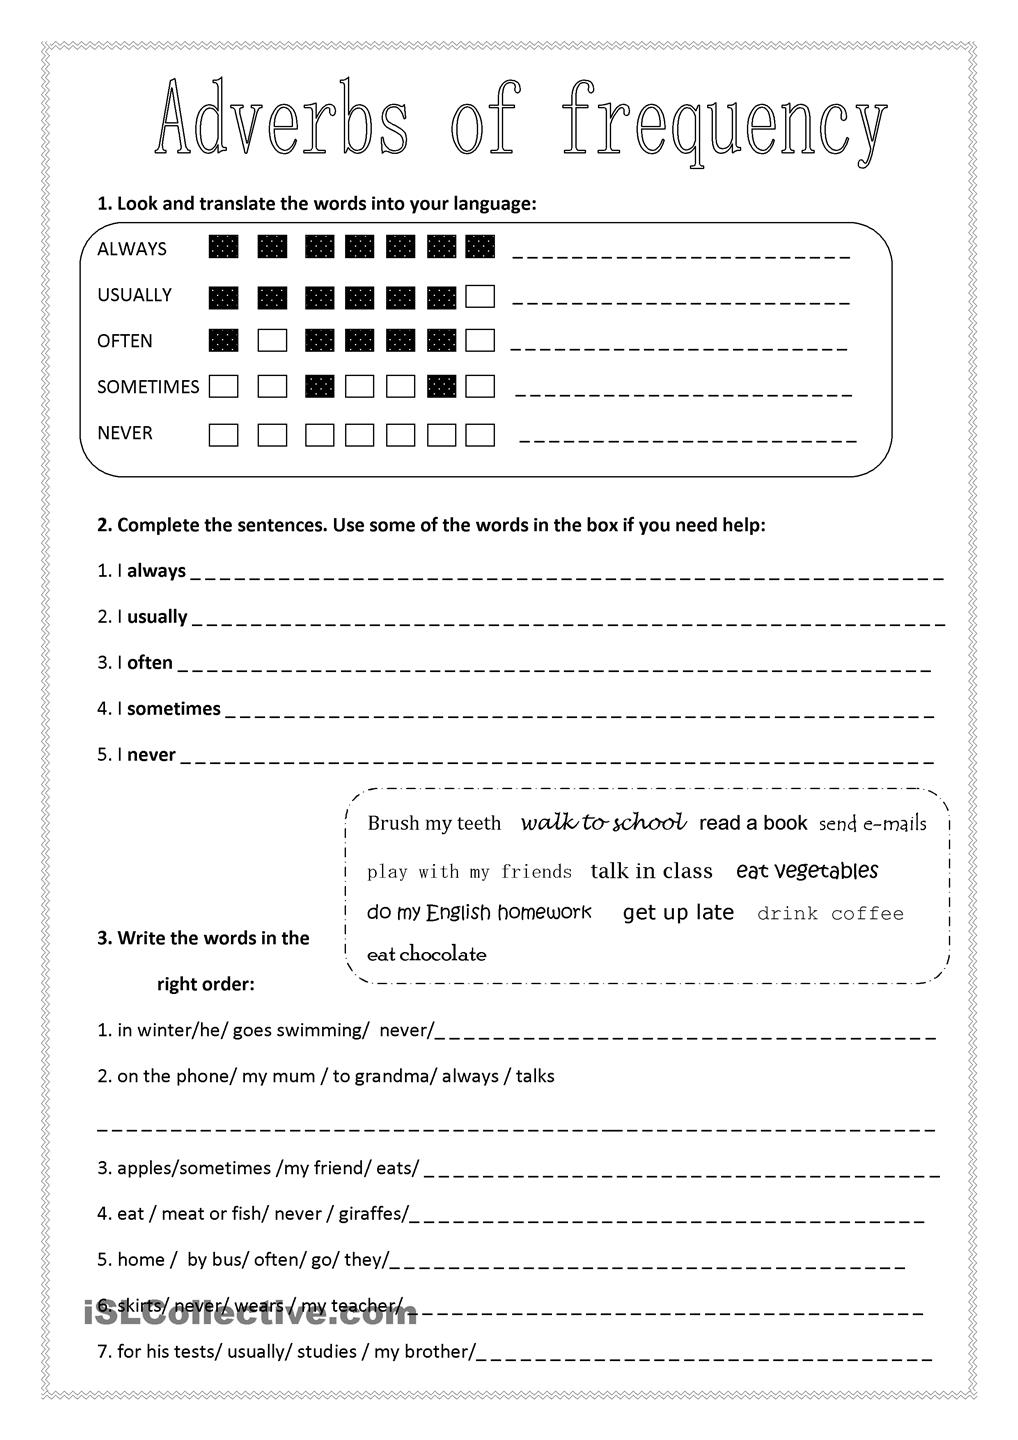 Worksheet On Adverbs Of Frequency For Grade 5